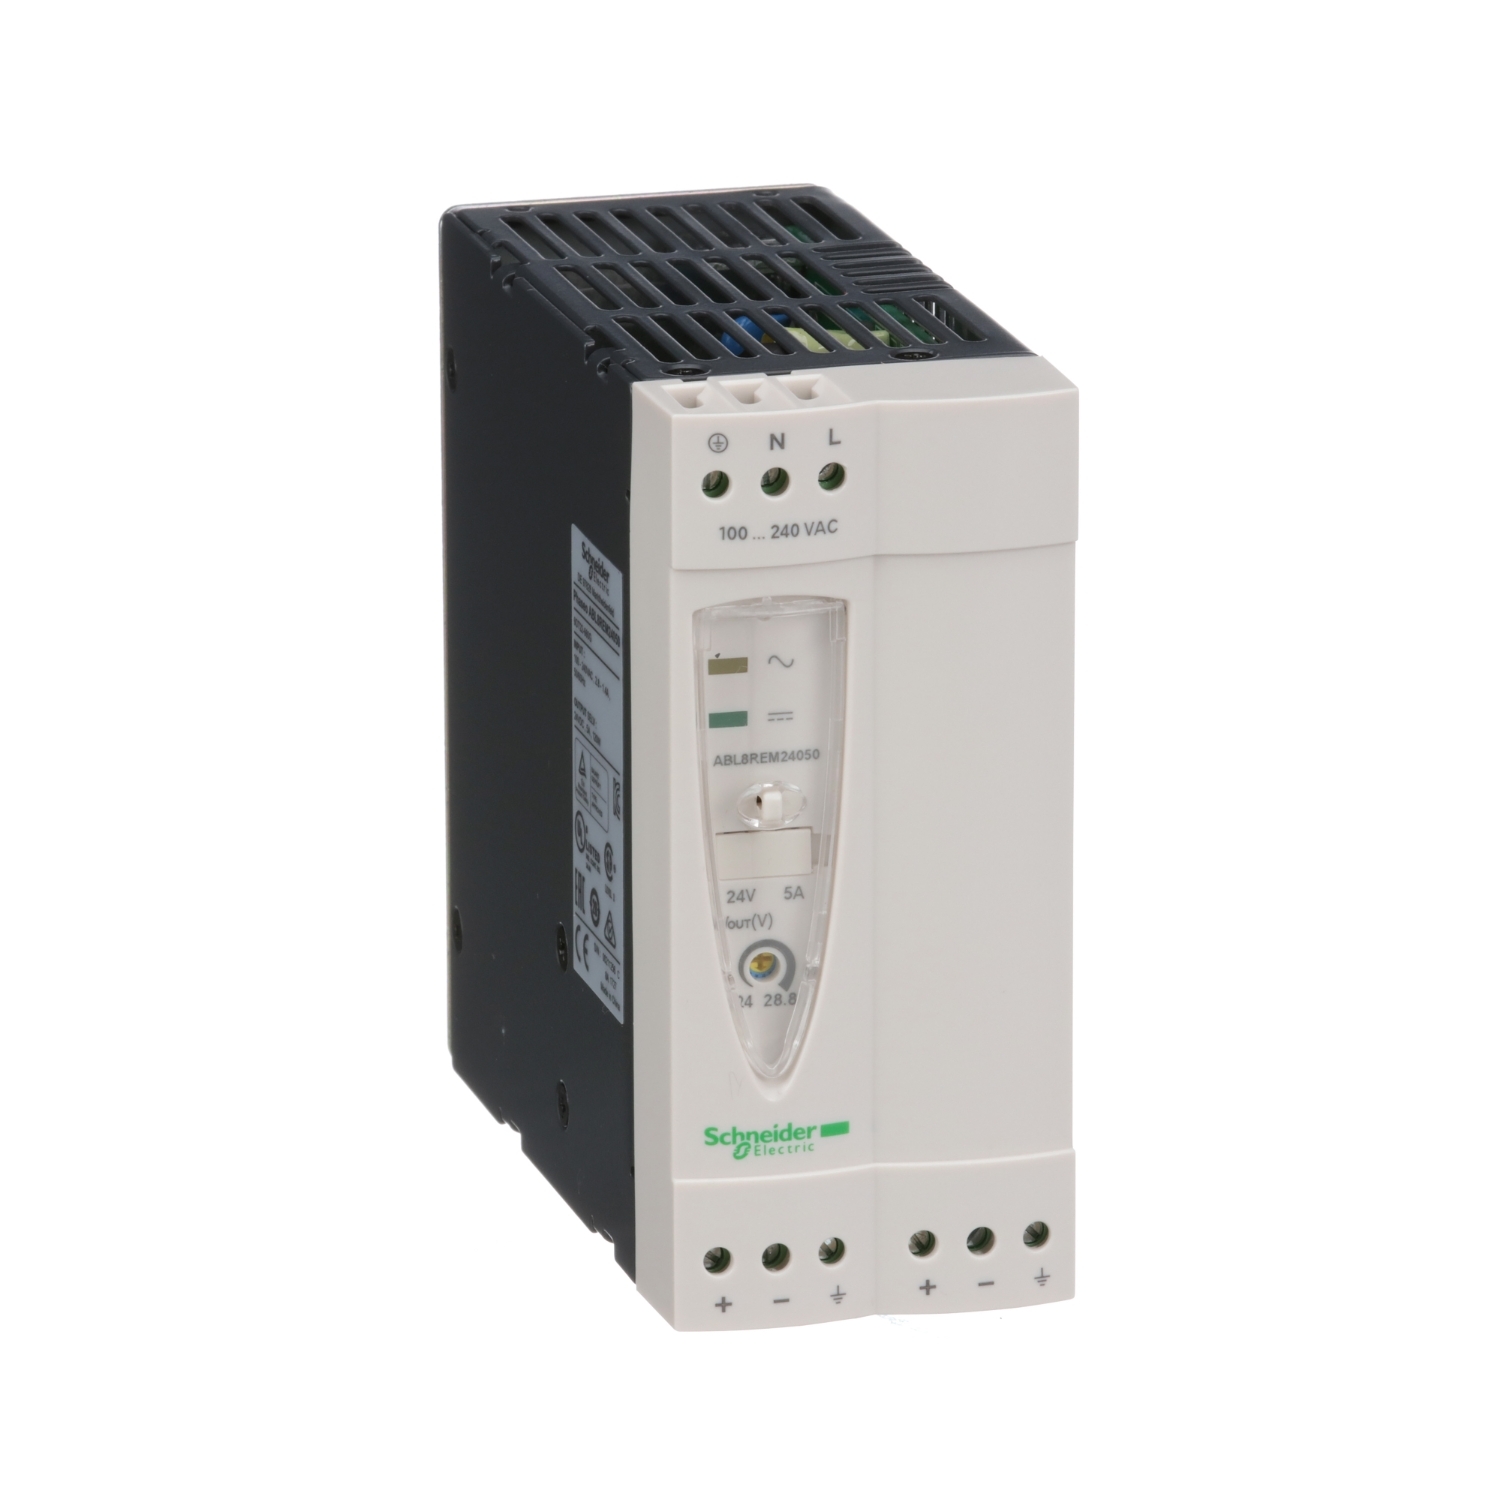 Regulated Switch Power Supply, 1 or 2-phase, 100..240V AC, 24V, 5 A